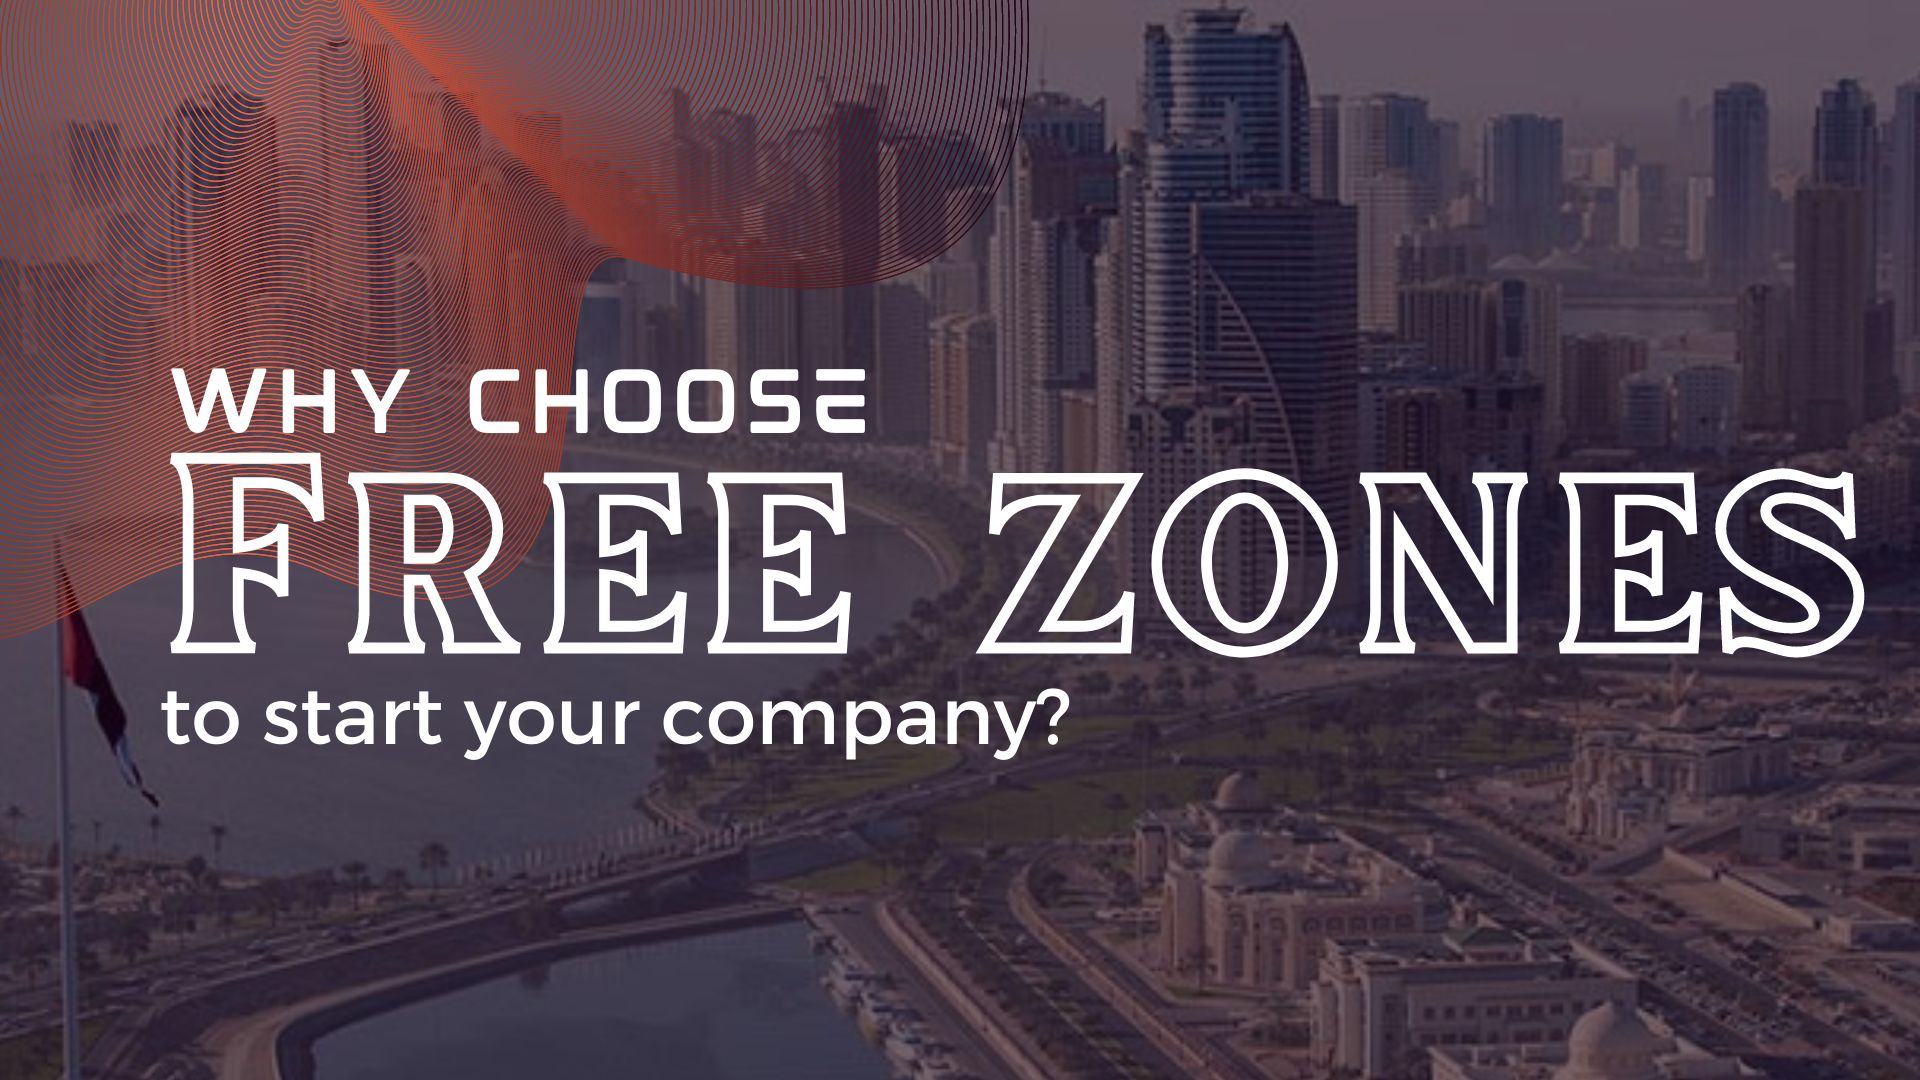 Why are free zones ideal business places to start and grow your business?Here are some of the mos...